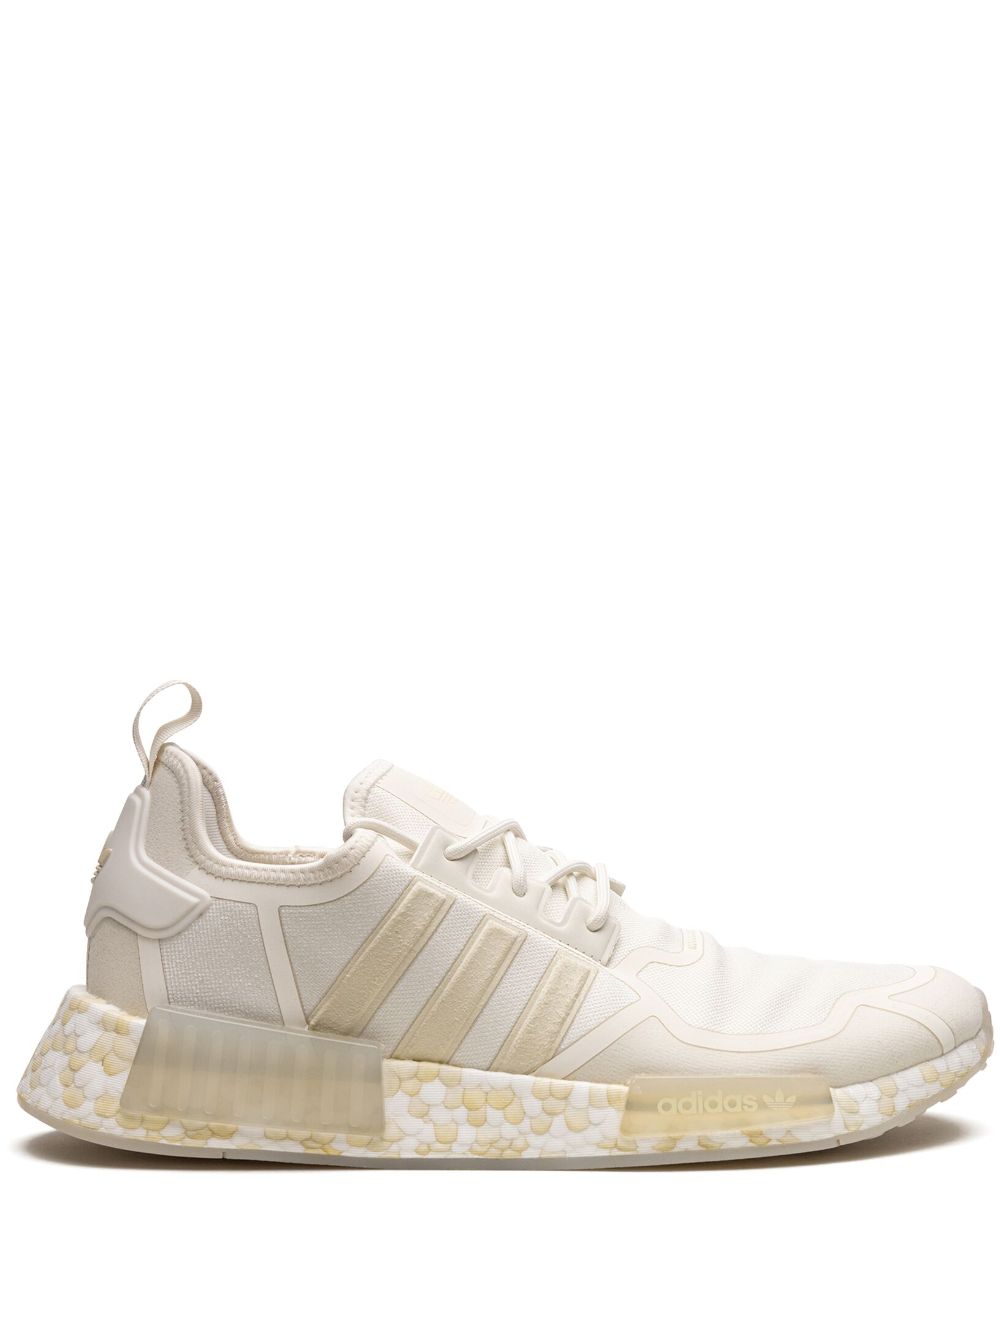 adidas NMD_R1 low-top sneakers - White von adidas